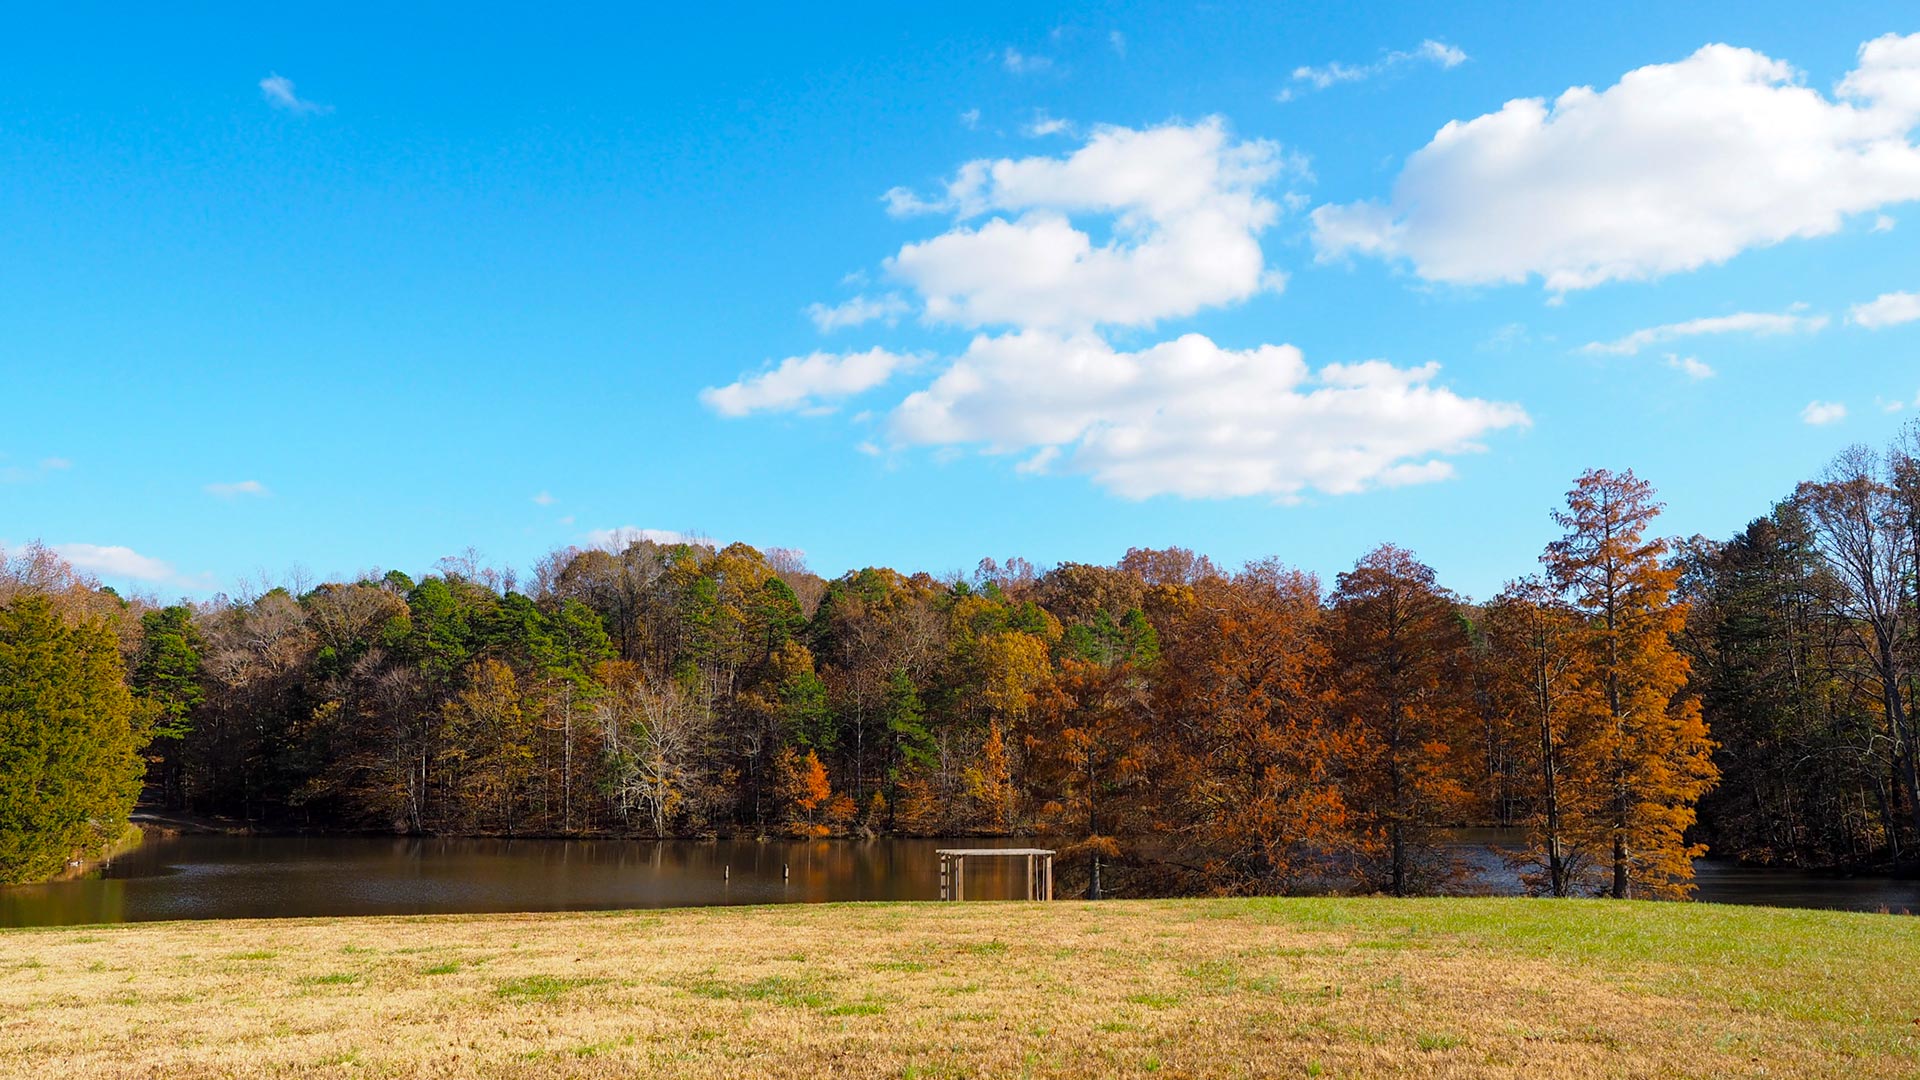 Trees with fall leaves line the banks of the College Lake, reflecting off its surface. (Mei Lander Photo)